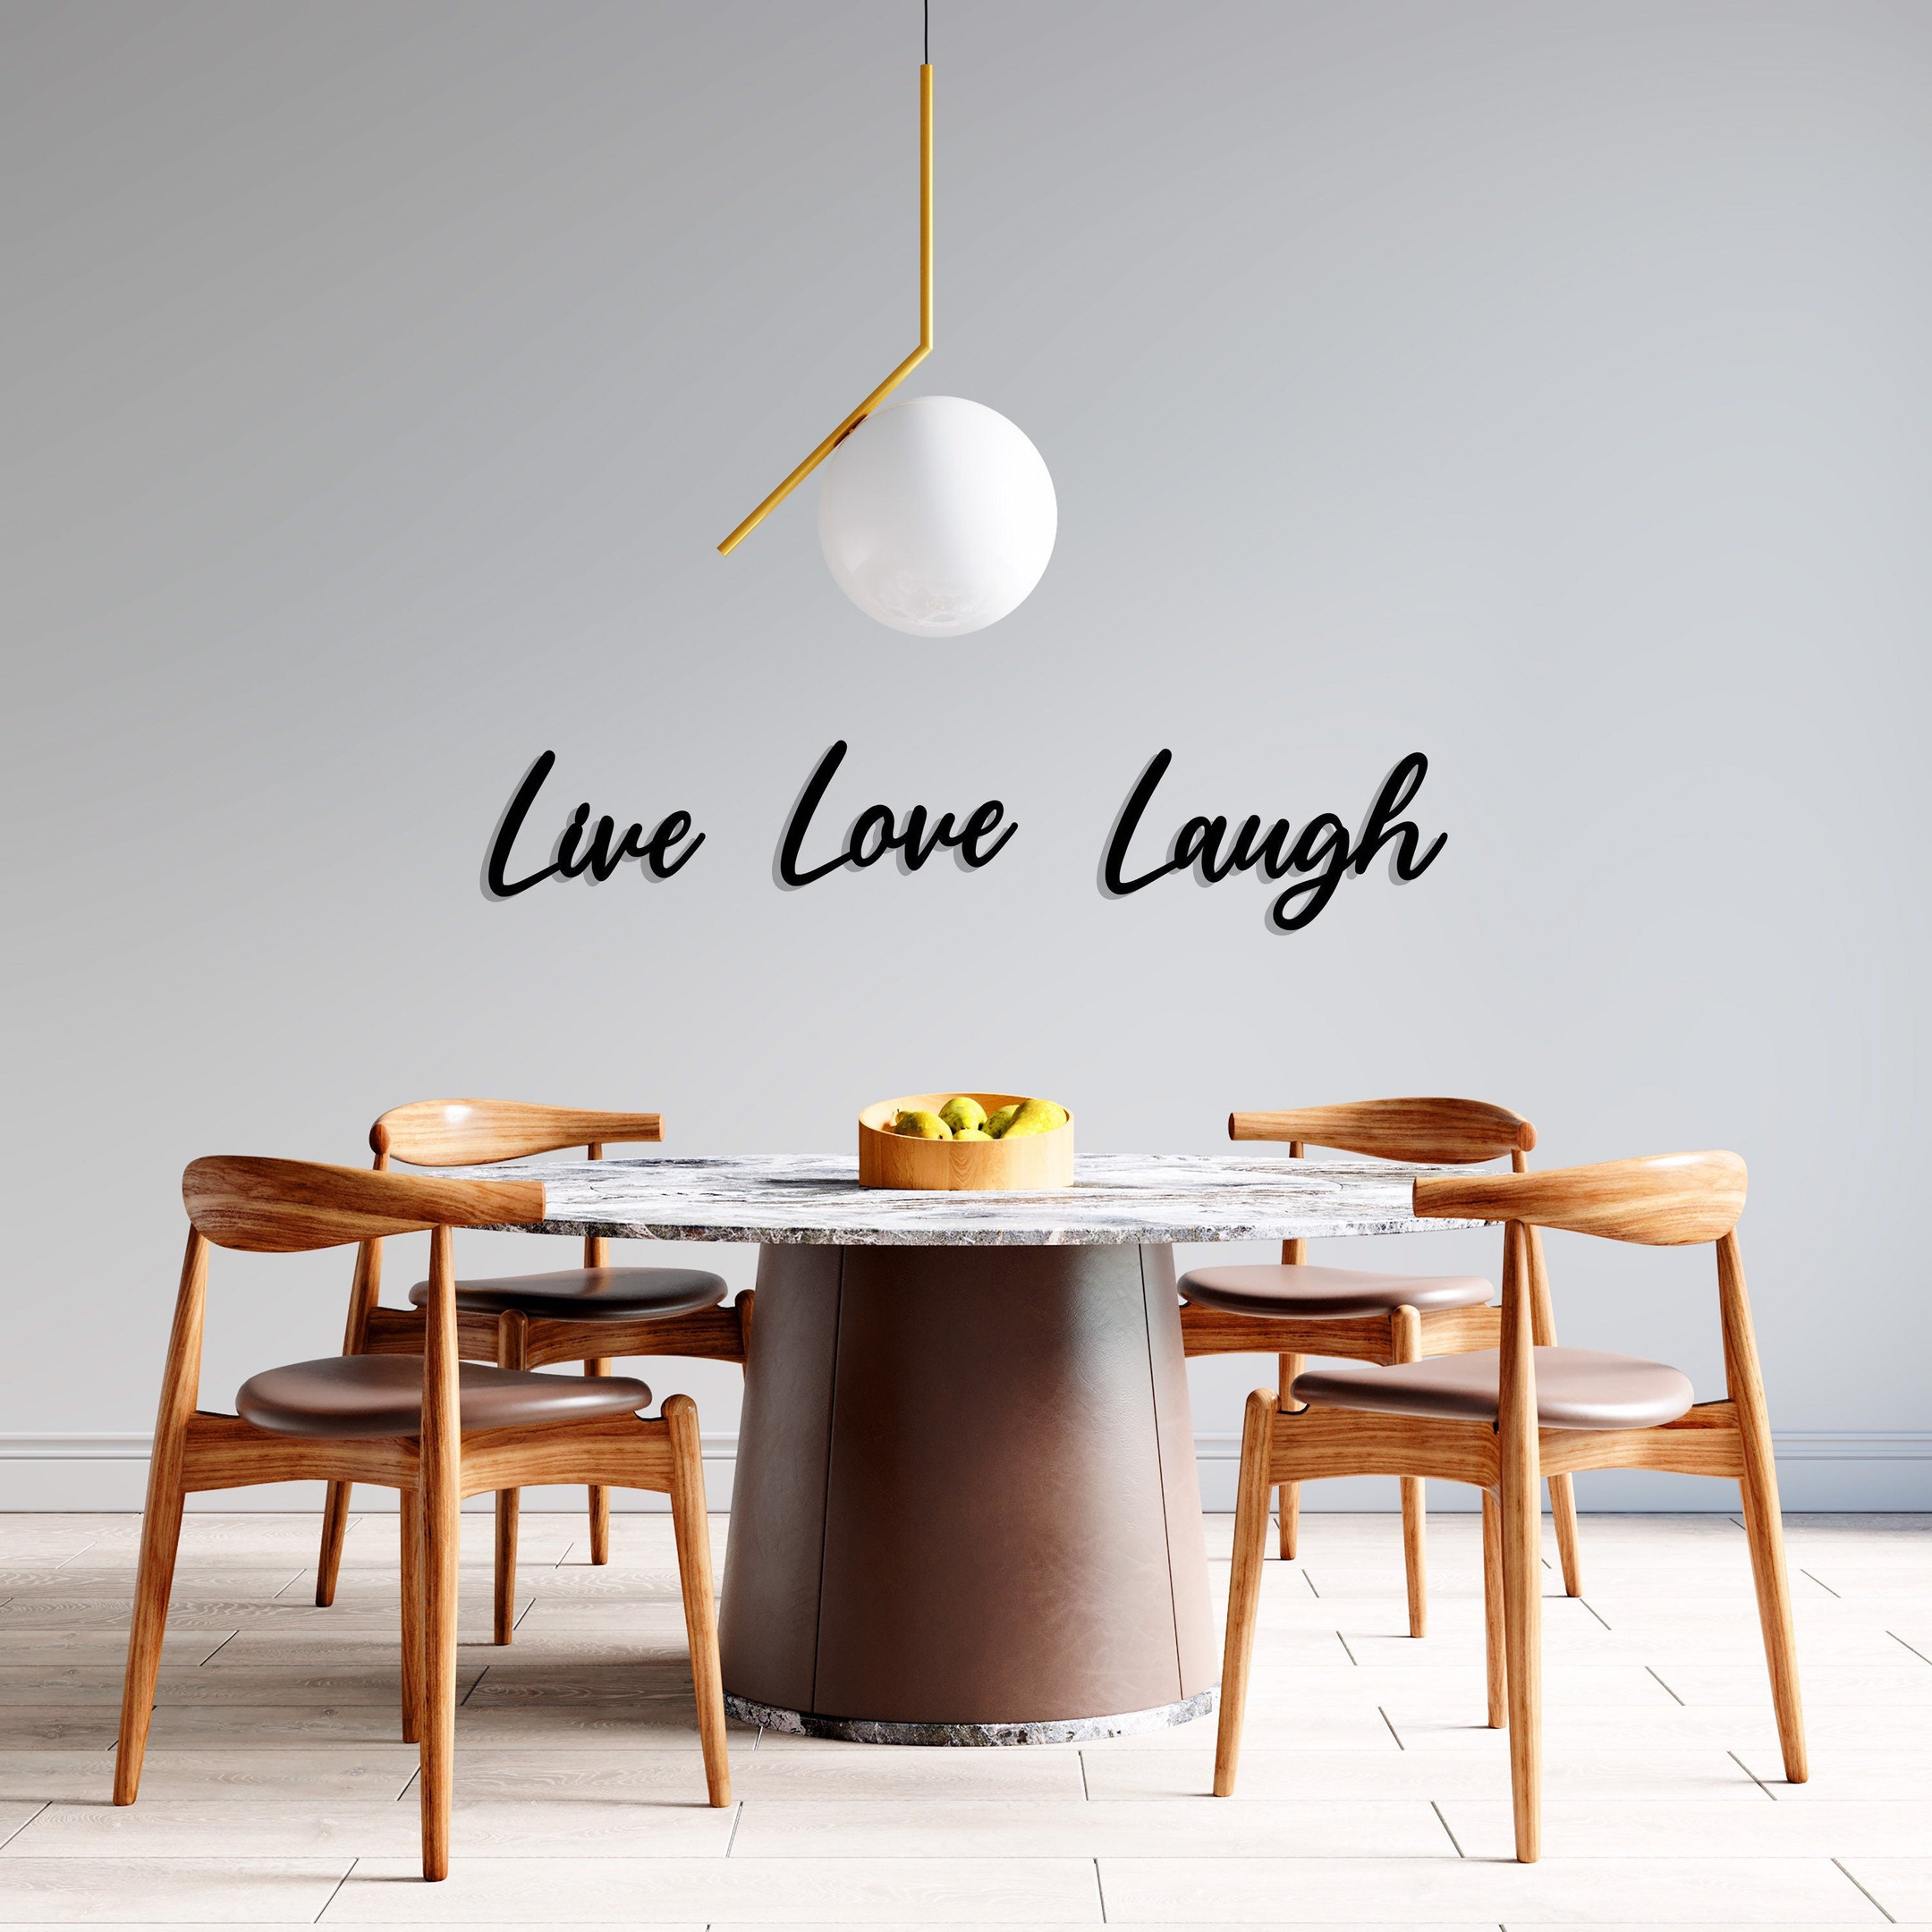 Live Love Laugh Quote Wall Art, Metal Wall Decor, Inspirational Wall Decor, Housewarming Gift, Metal Art, Metal Wall Sign, Home Decor, Metal Laser Cut Metal Signs Custom Gift Ideas 18x18IN